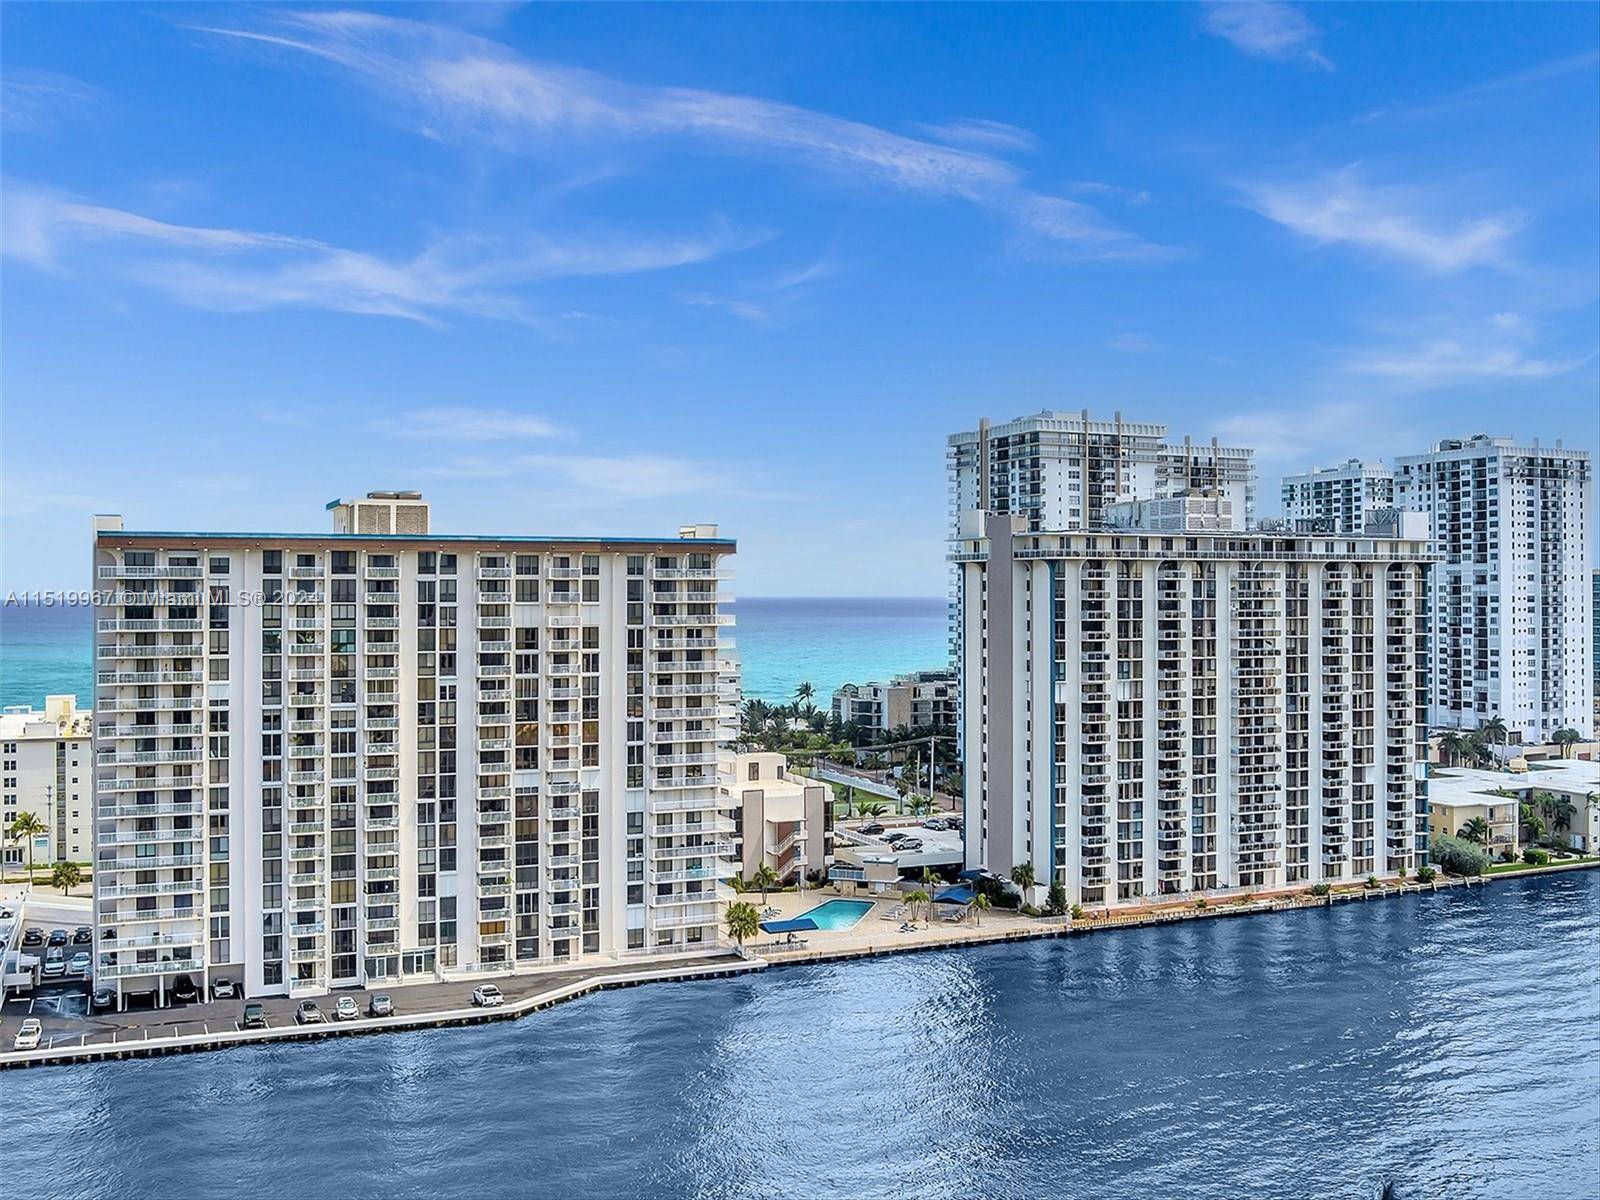 TOTALLY RENOVATED MODERN, AND BEAUTIFUL UNIT WITH GORGEOUS VIEWS OF THE INTRACOASTAL WATERWAY FROM THE BALCONY AND EVERY ROOM !